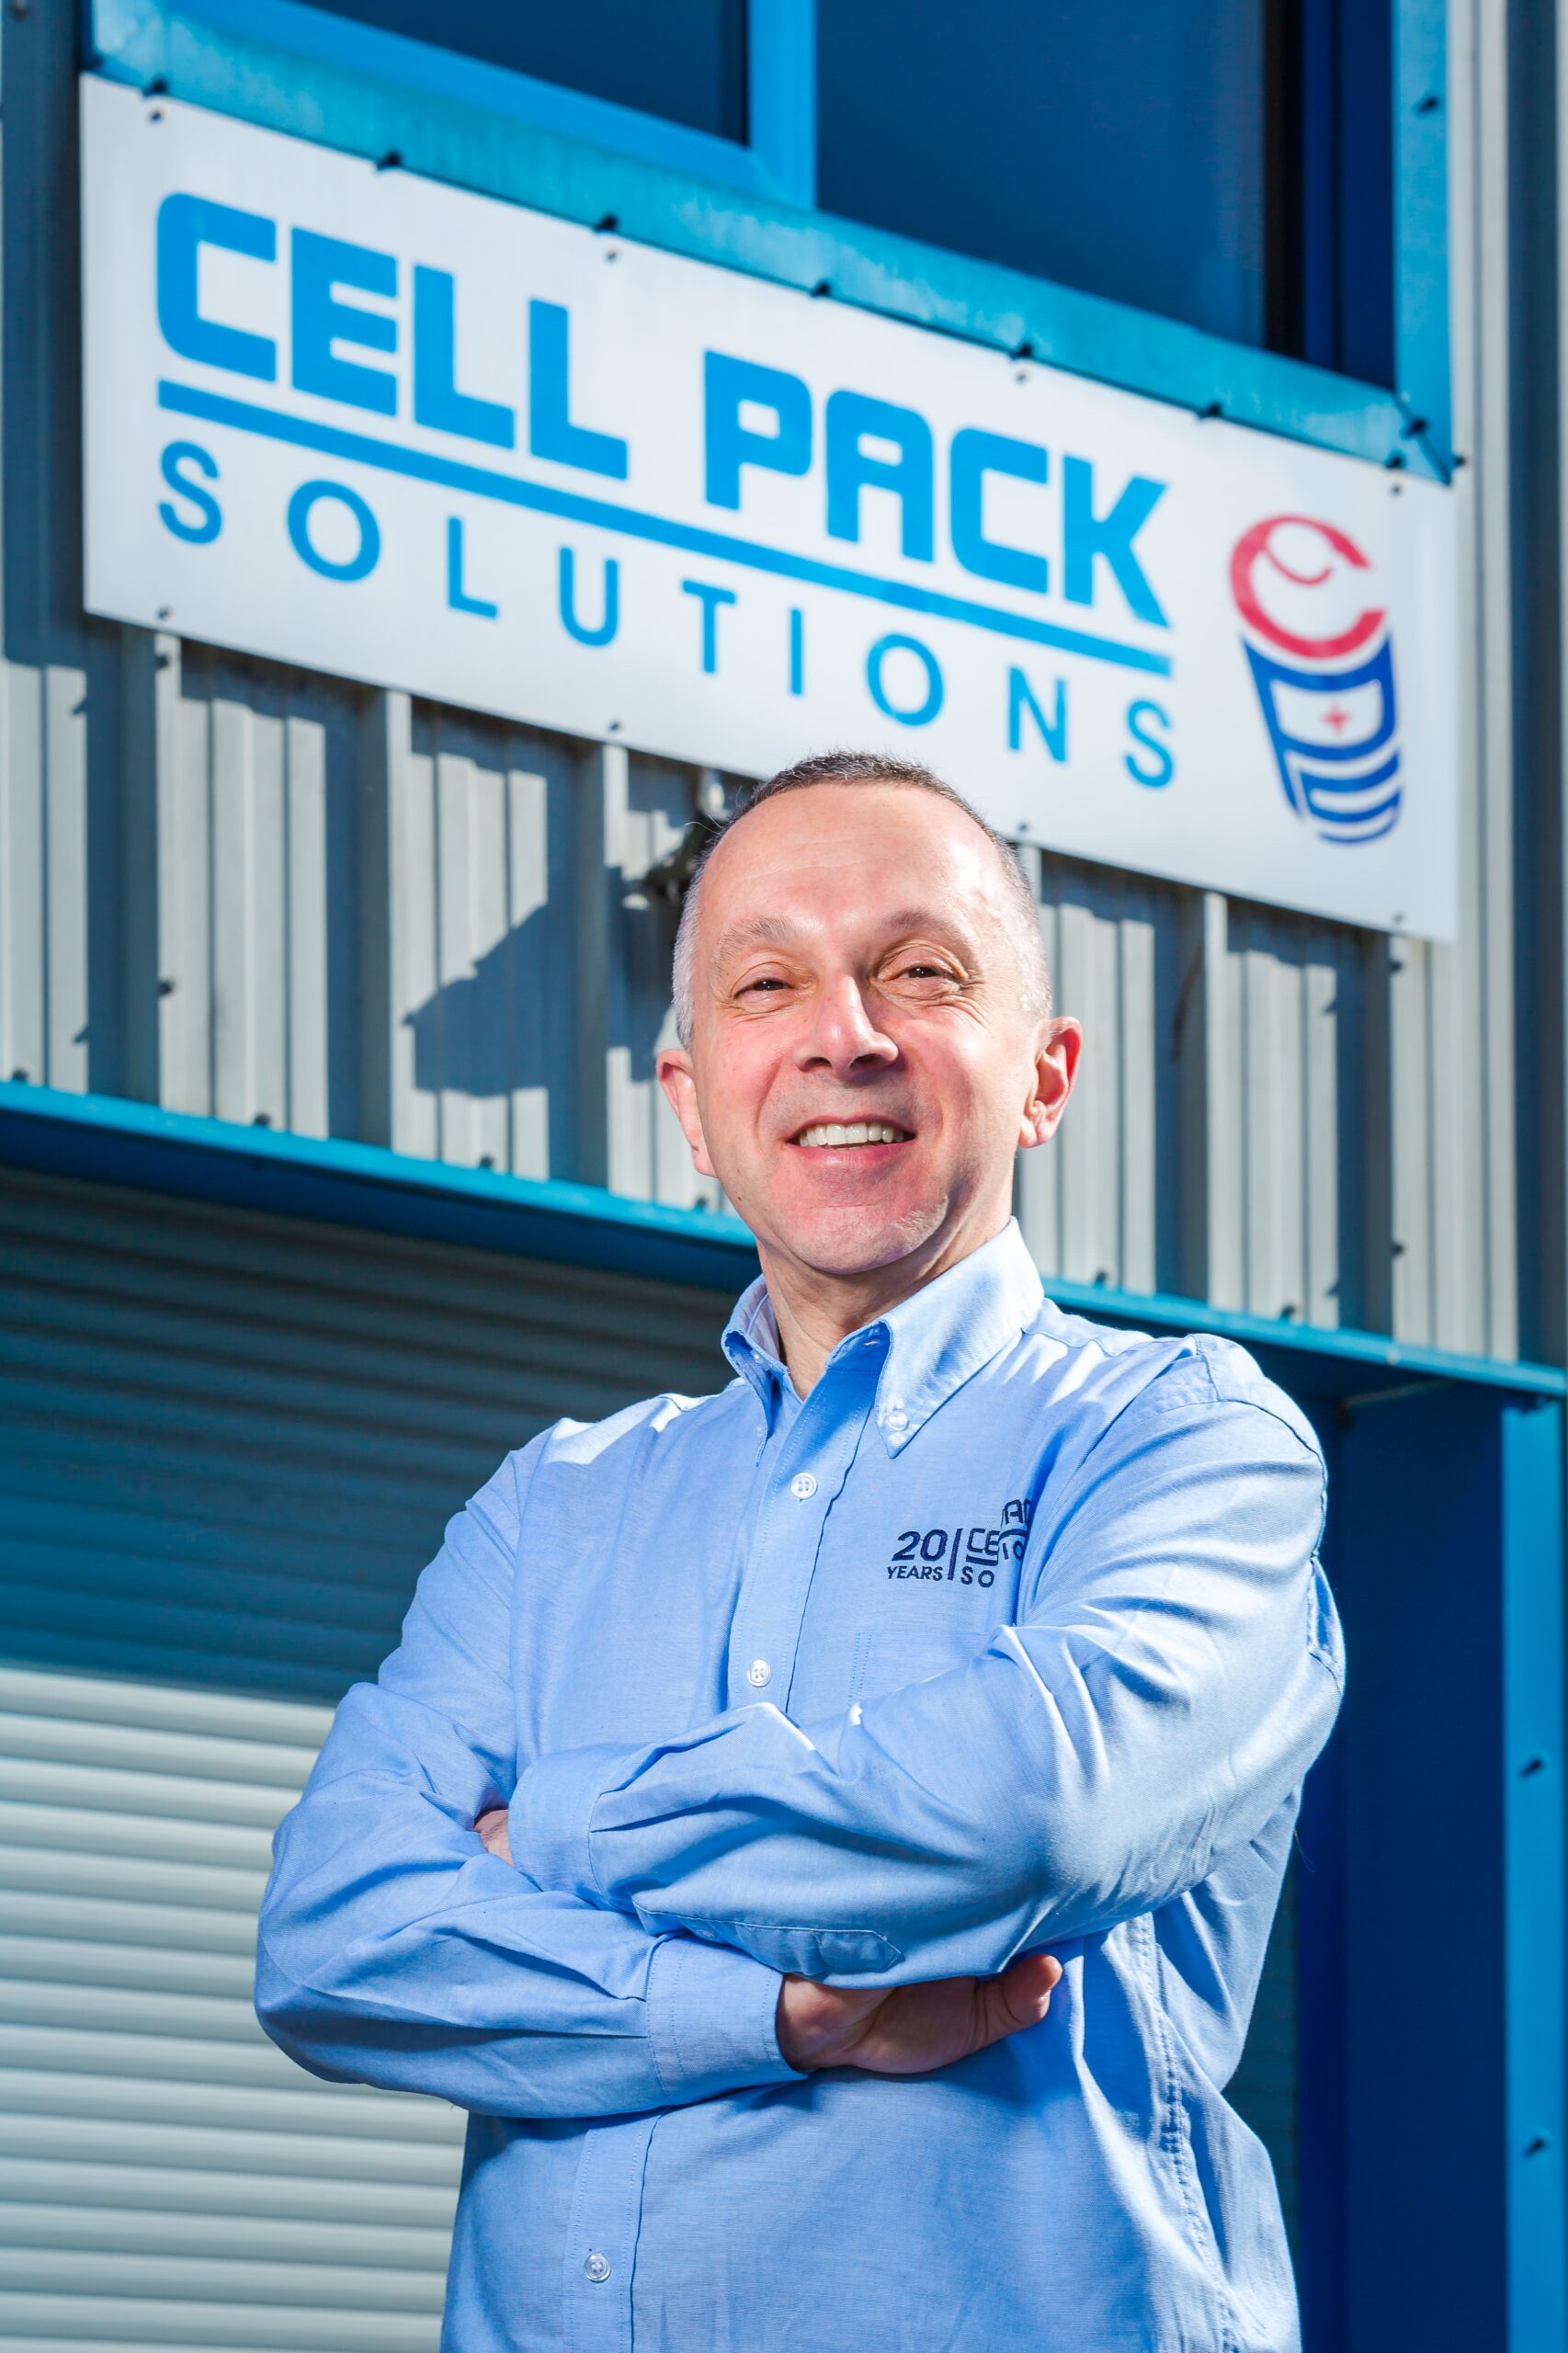 MD of Cell Pack Solutions talks business growth during pandemic and being a founding member of AMF.